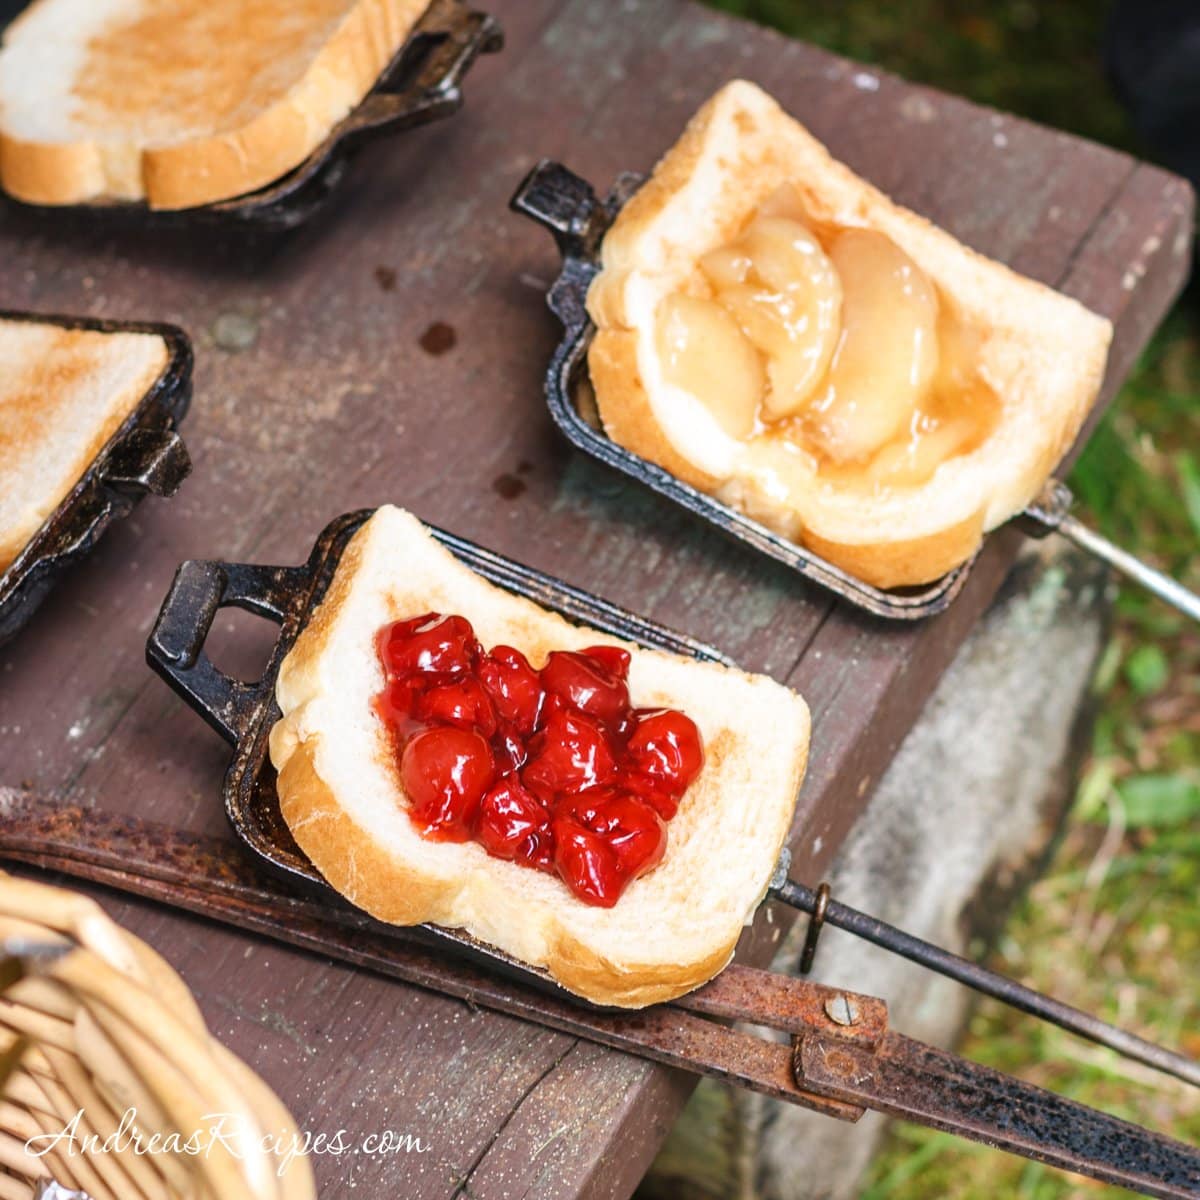 Slices of bread topped with fruit in pie irons.